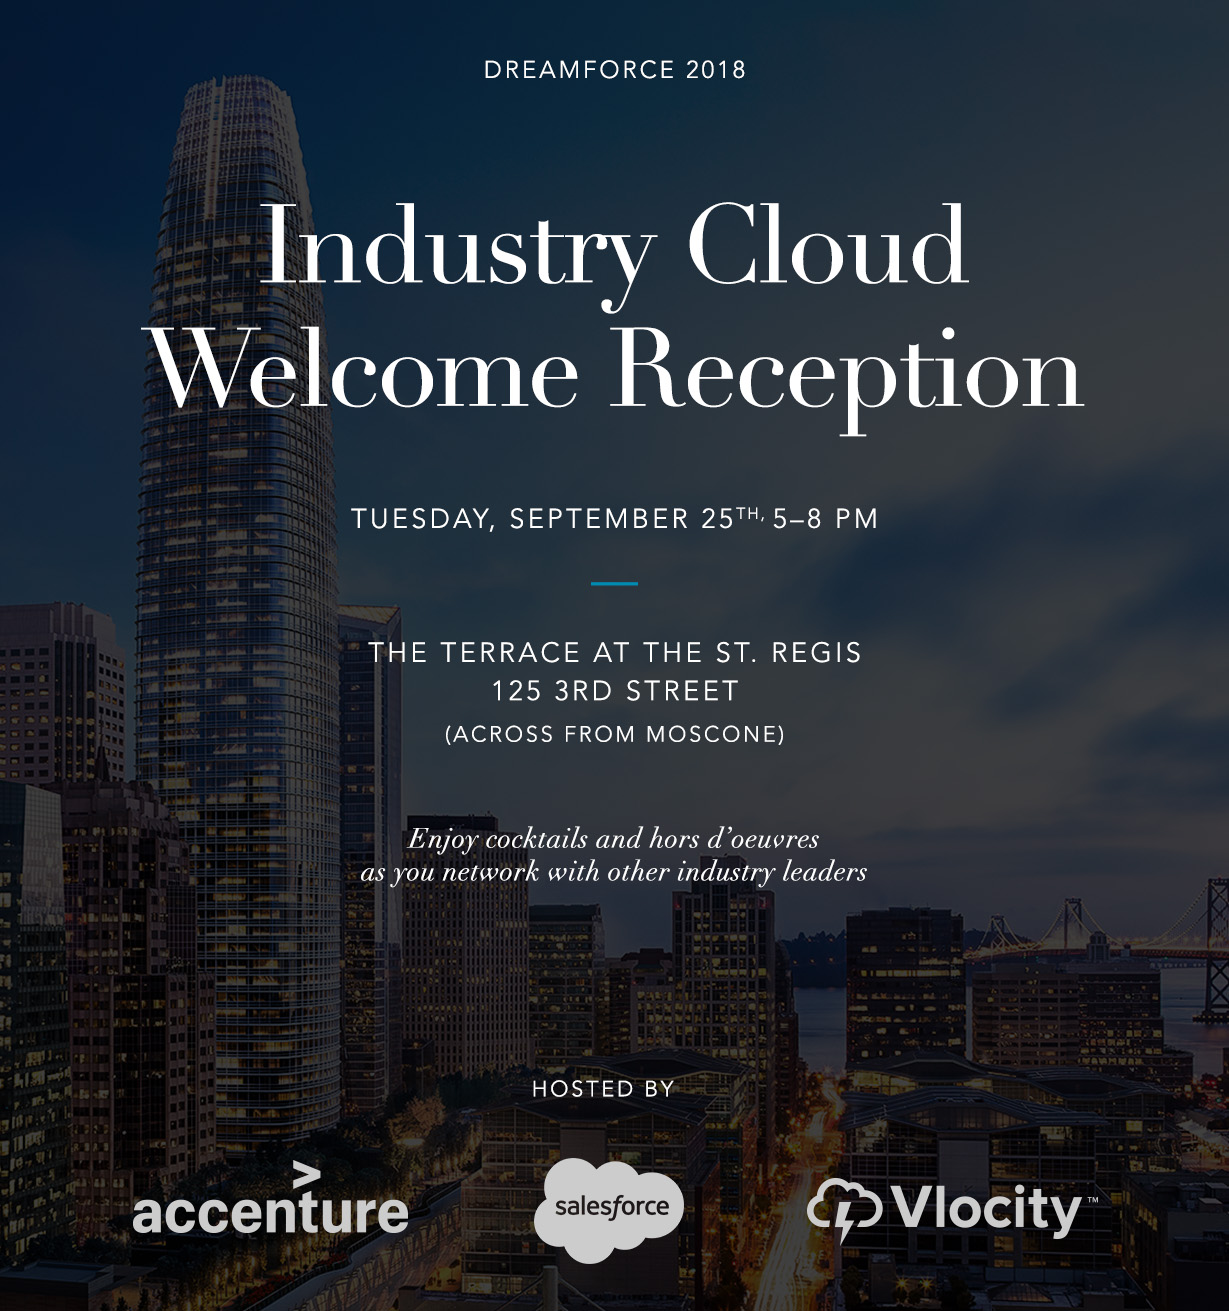 Dreamforce 2017 Industry Cloud Welcome Reception 